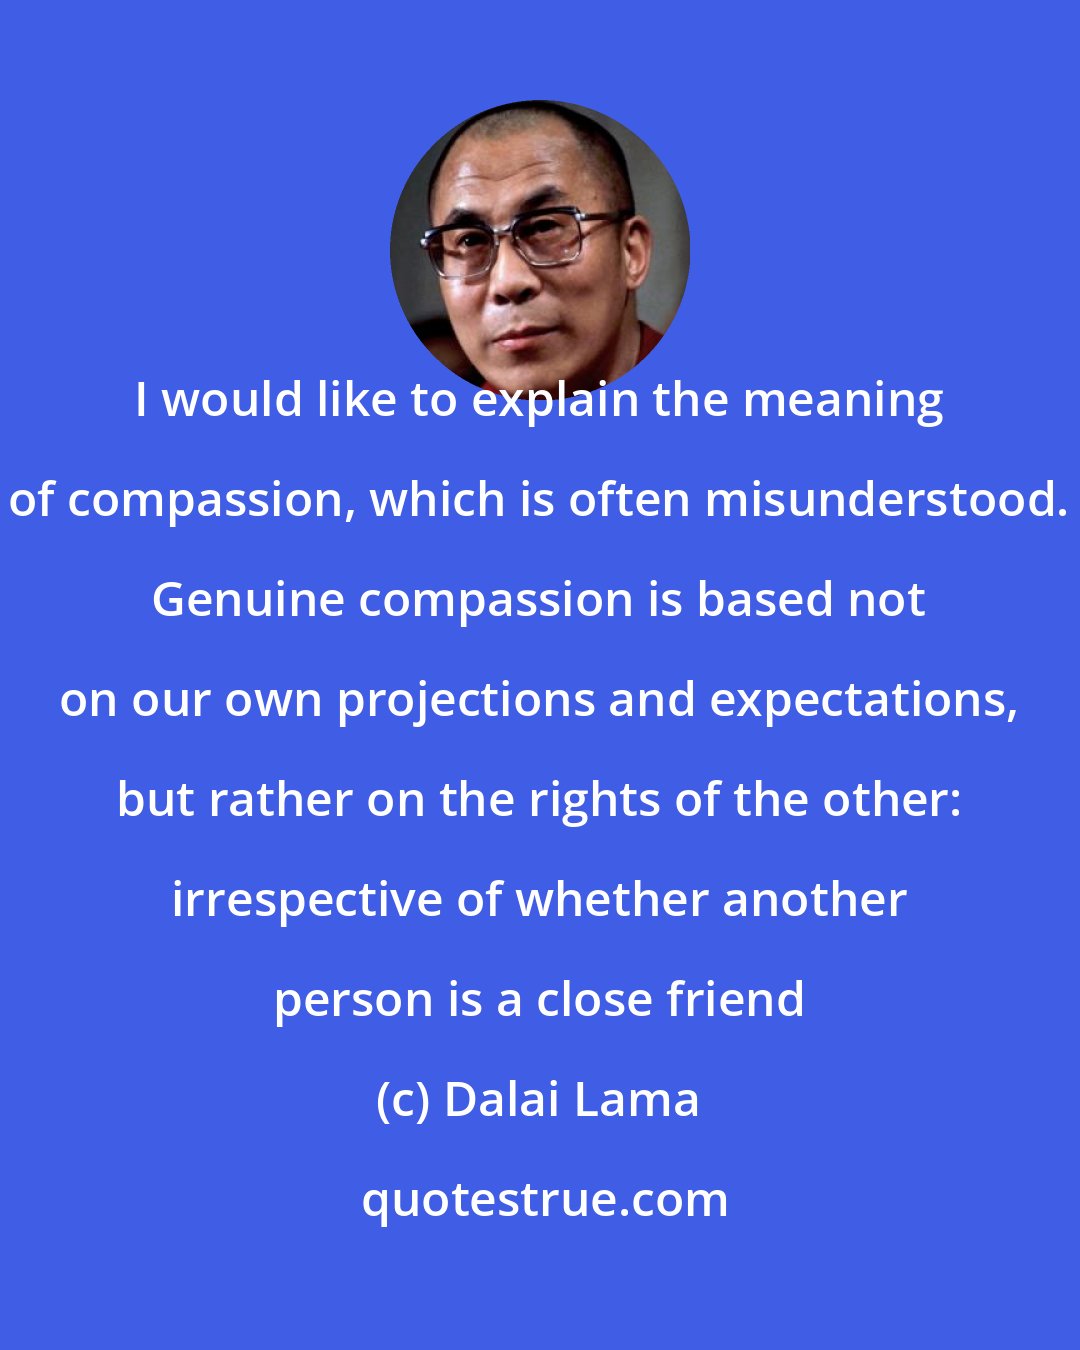 Dalai Lama: I would like to explain the meaning of compassion, which is often misunderstood. Genuine compassion is based not on our own projections and expectations, but rather on the rights of the other: irrespective of whether another person is a close friend